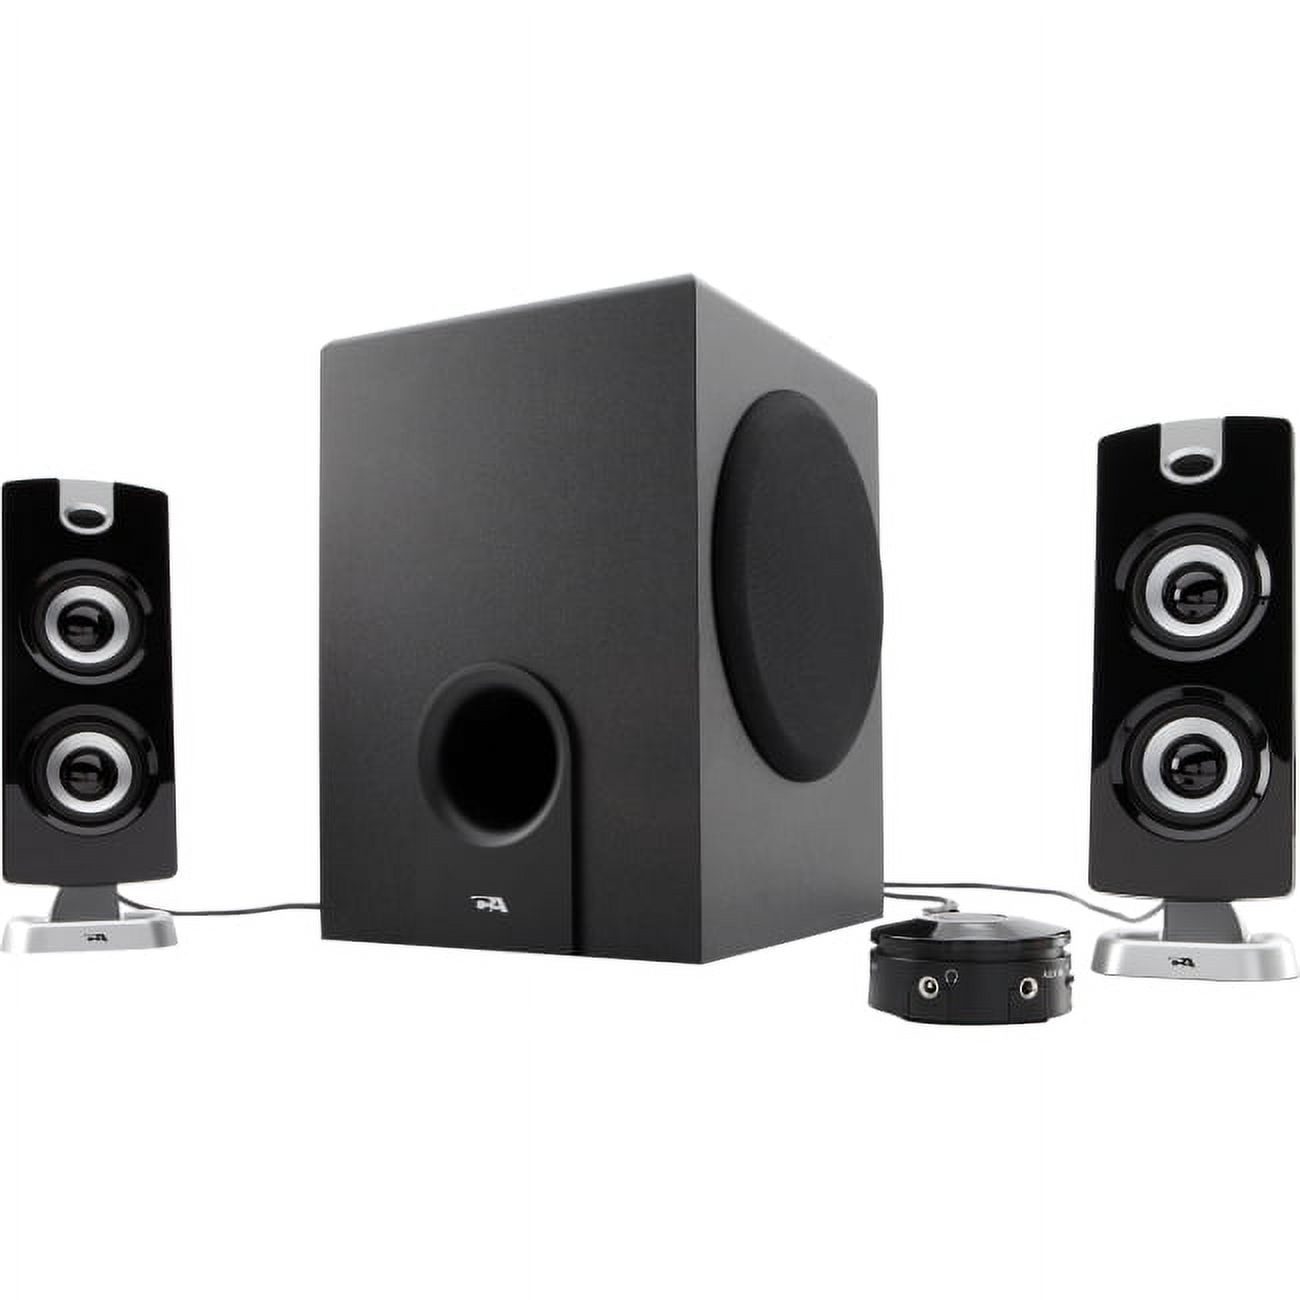 Cyber Acoustics CA-3602 Platinum Speaker System - 2.1-channel - 30W (RMS) / 62W (PMPO) - image 1 of 4